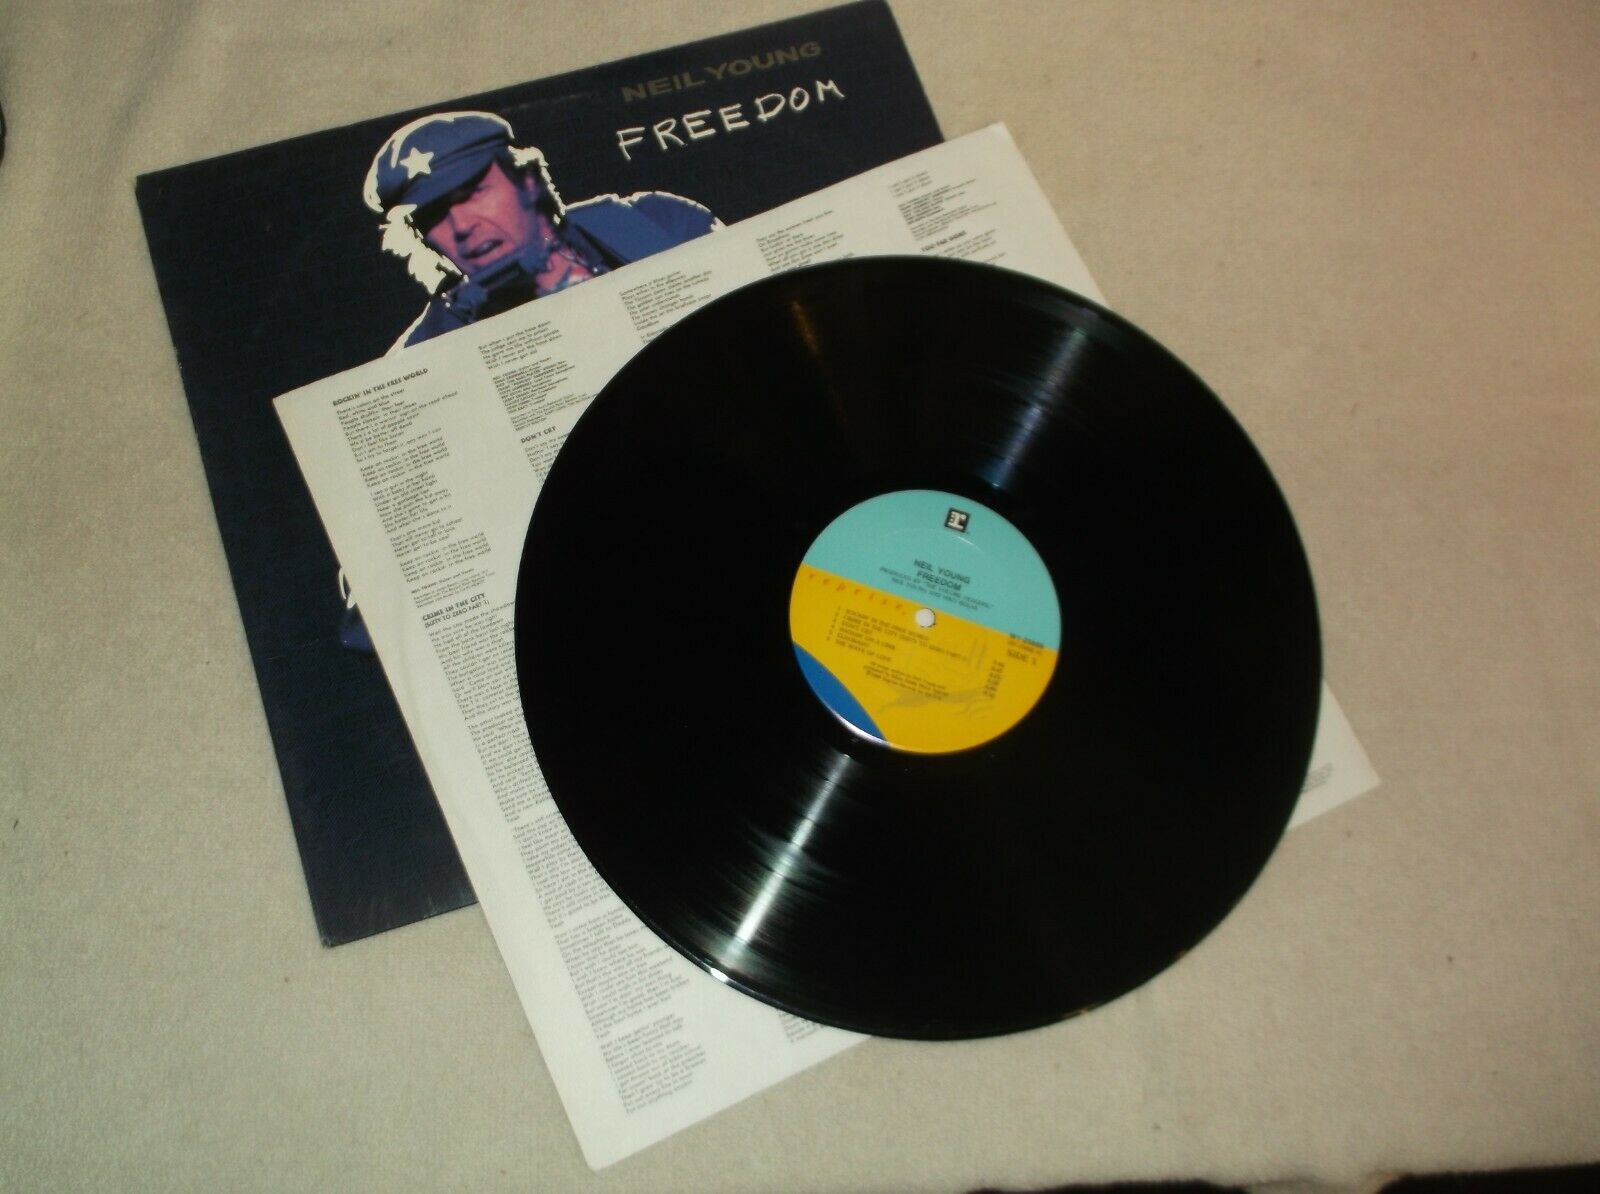 Pic 4 Neil Young, 1989 Freedom & 1986 Landing On Water, Vinyl Records.